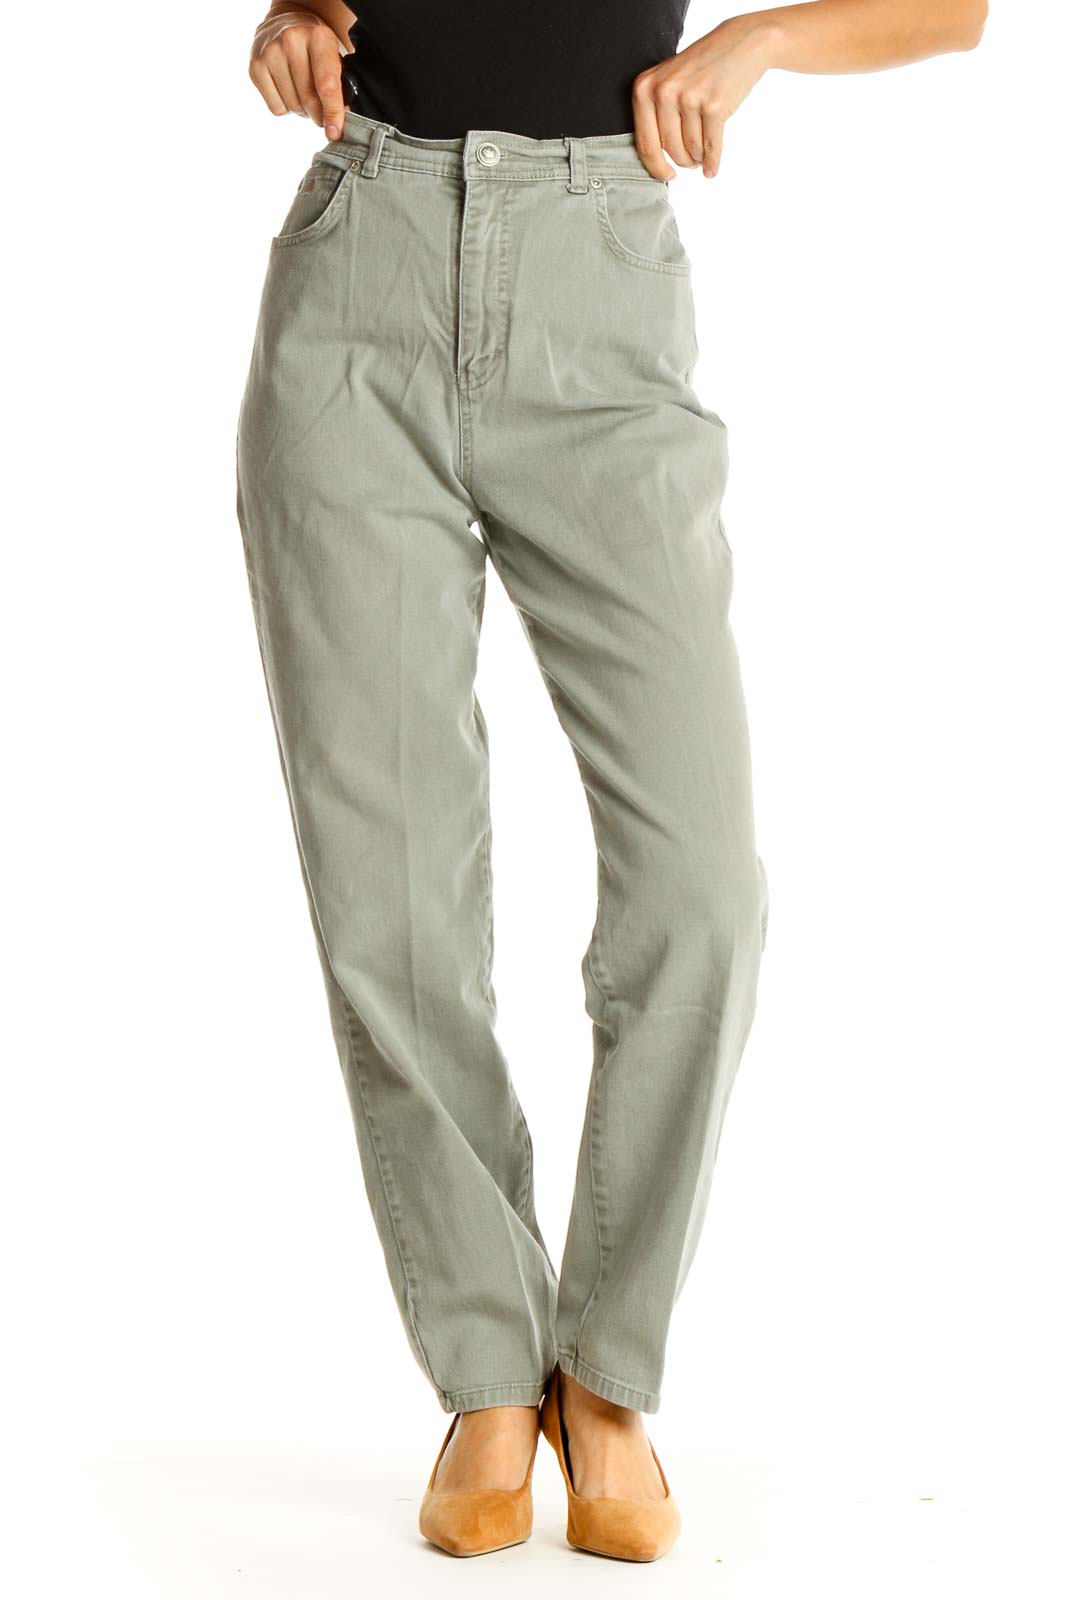 Gray Casual Cargos Pants Front